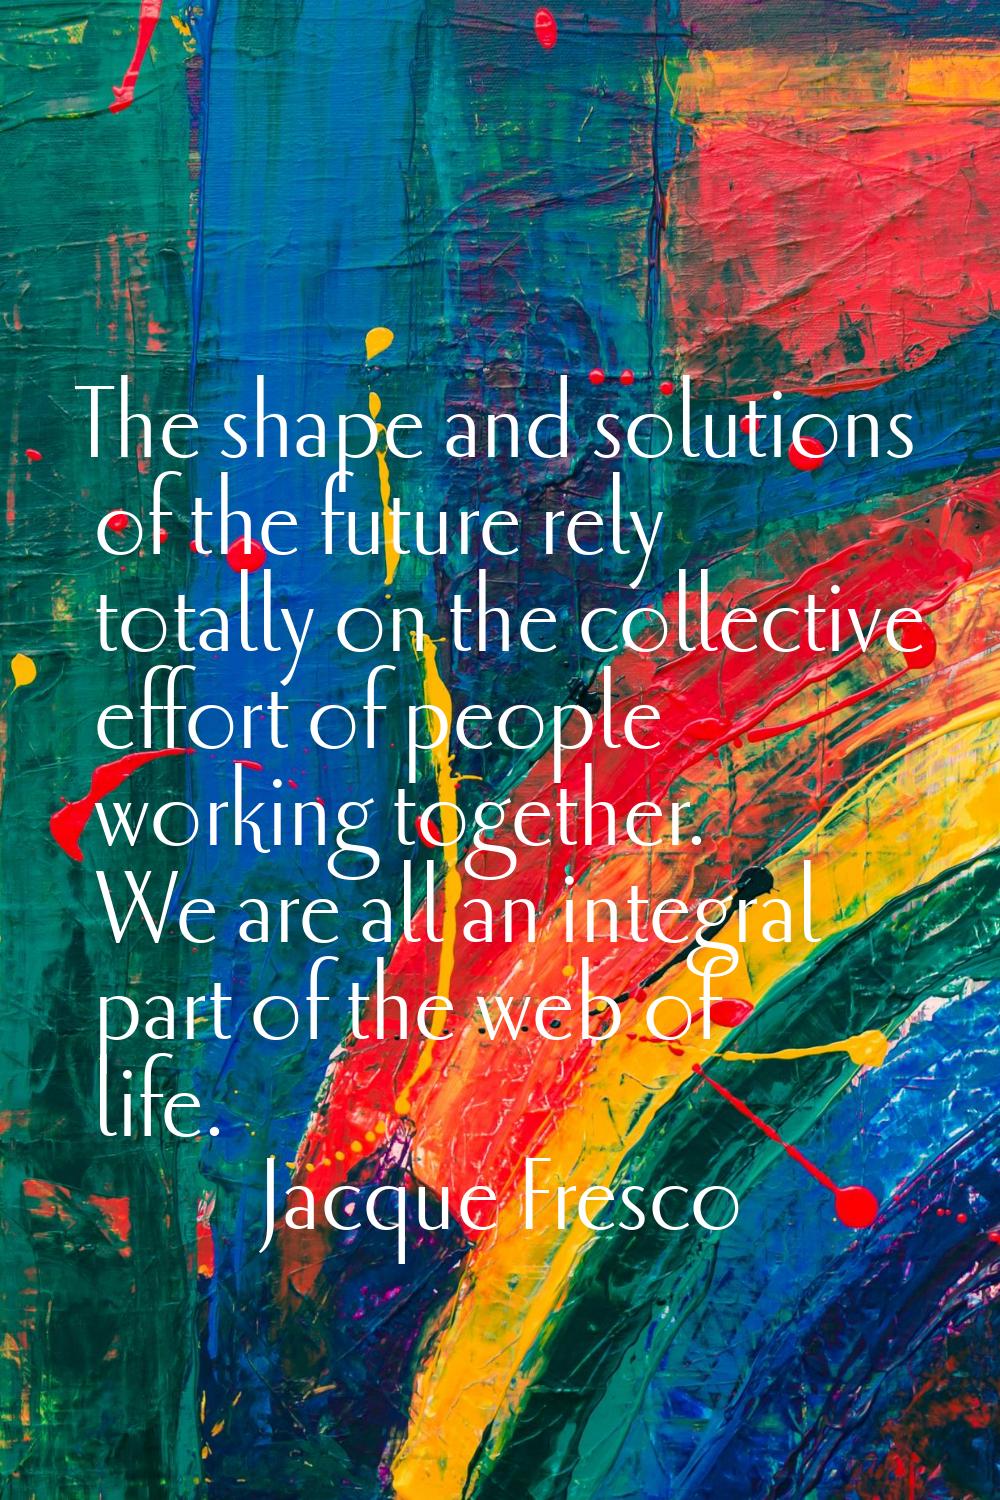 The shape and solutions of the future rely totally on the collective effort of people working toget